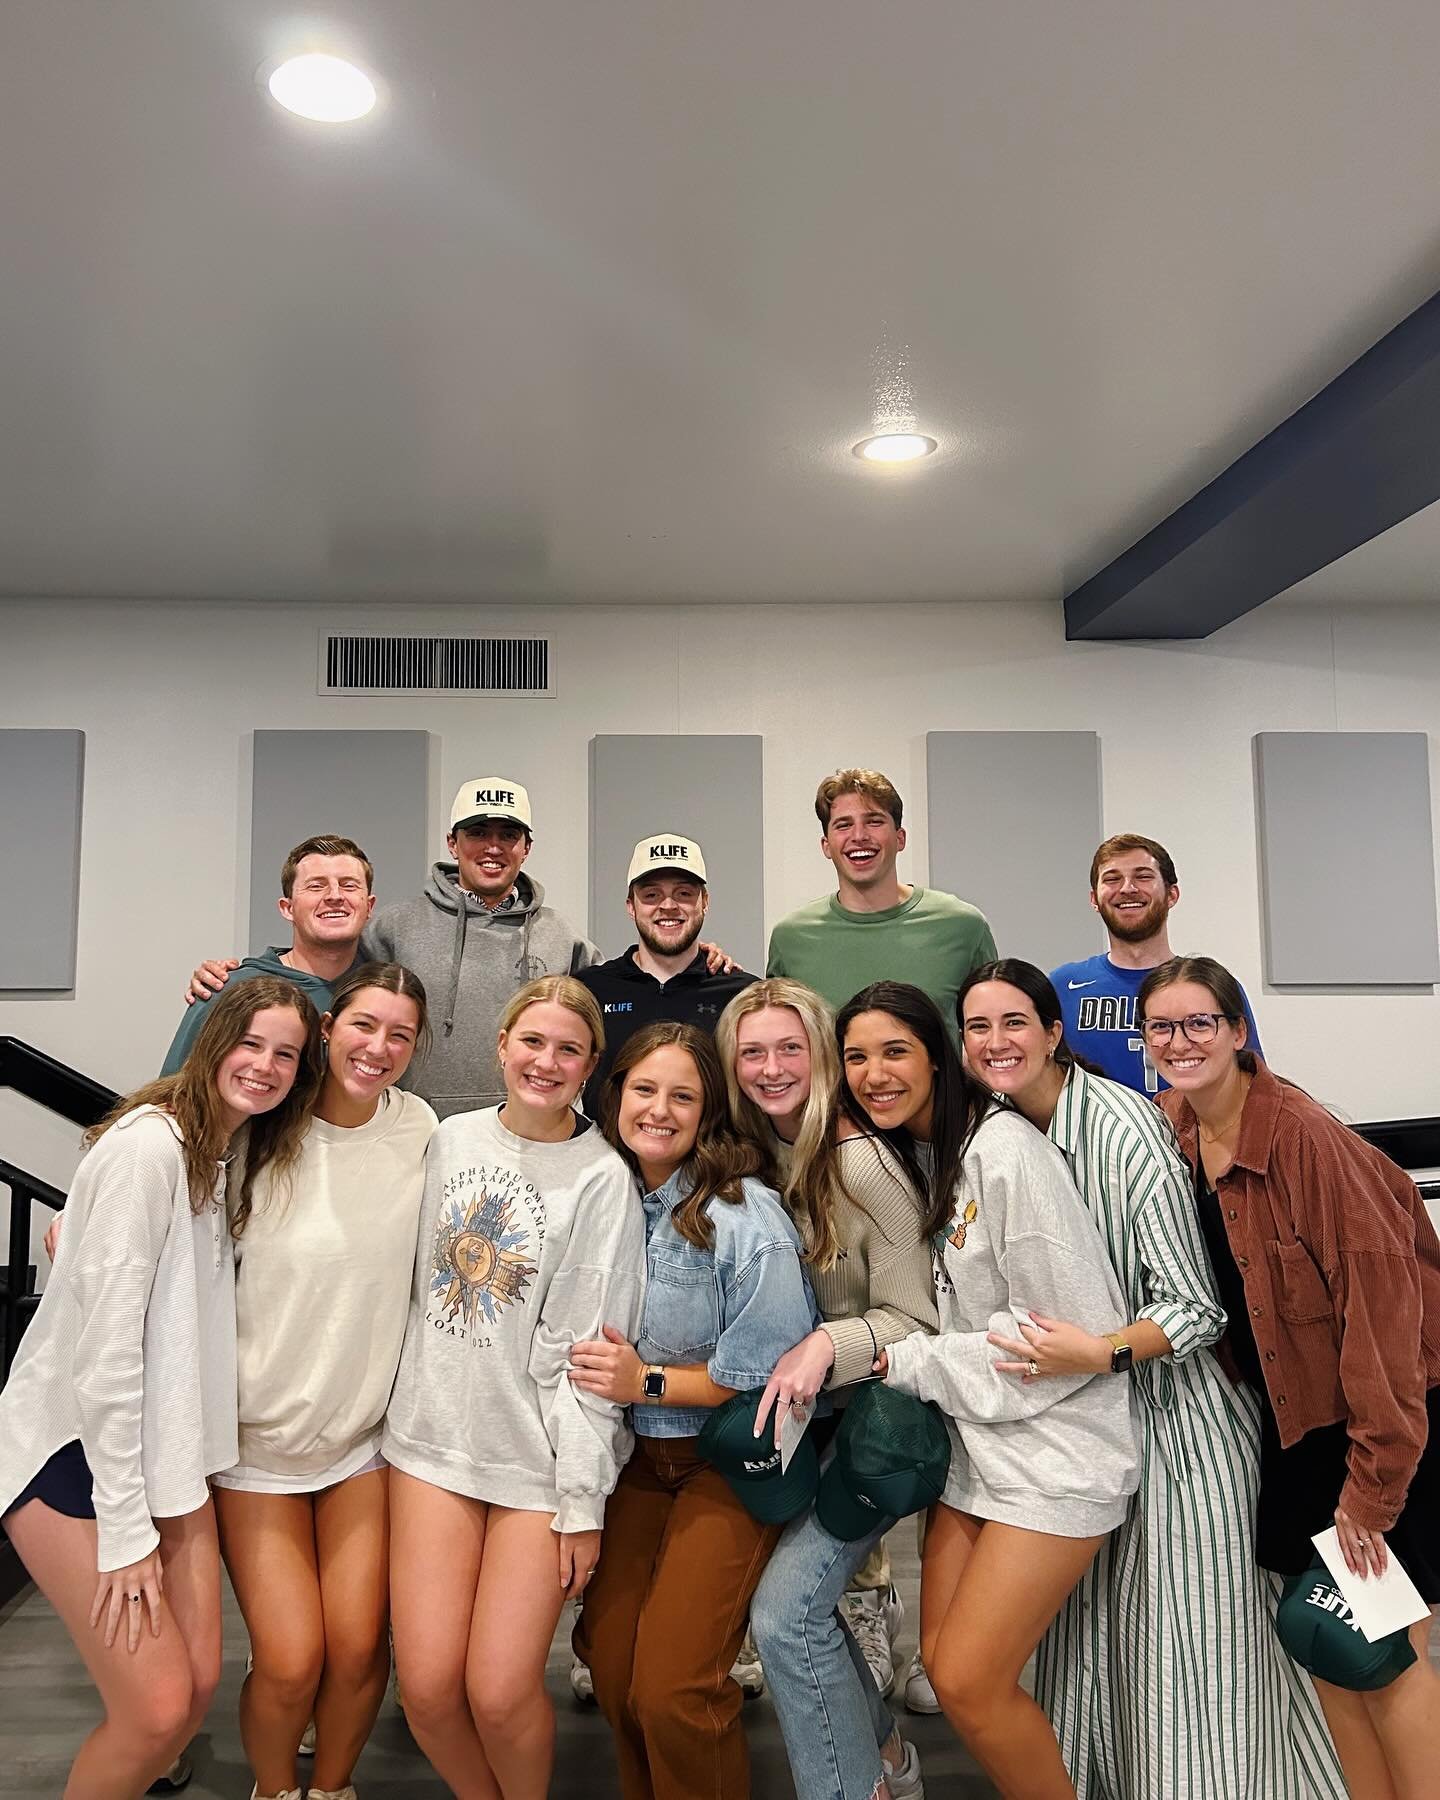 Spent our last meeting of the year honoring our seniors! We are so thankful for the impact they have made on KLife throughout their time at Baylor! We cannot wait to see what they do next!